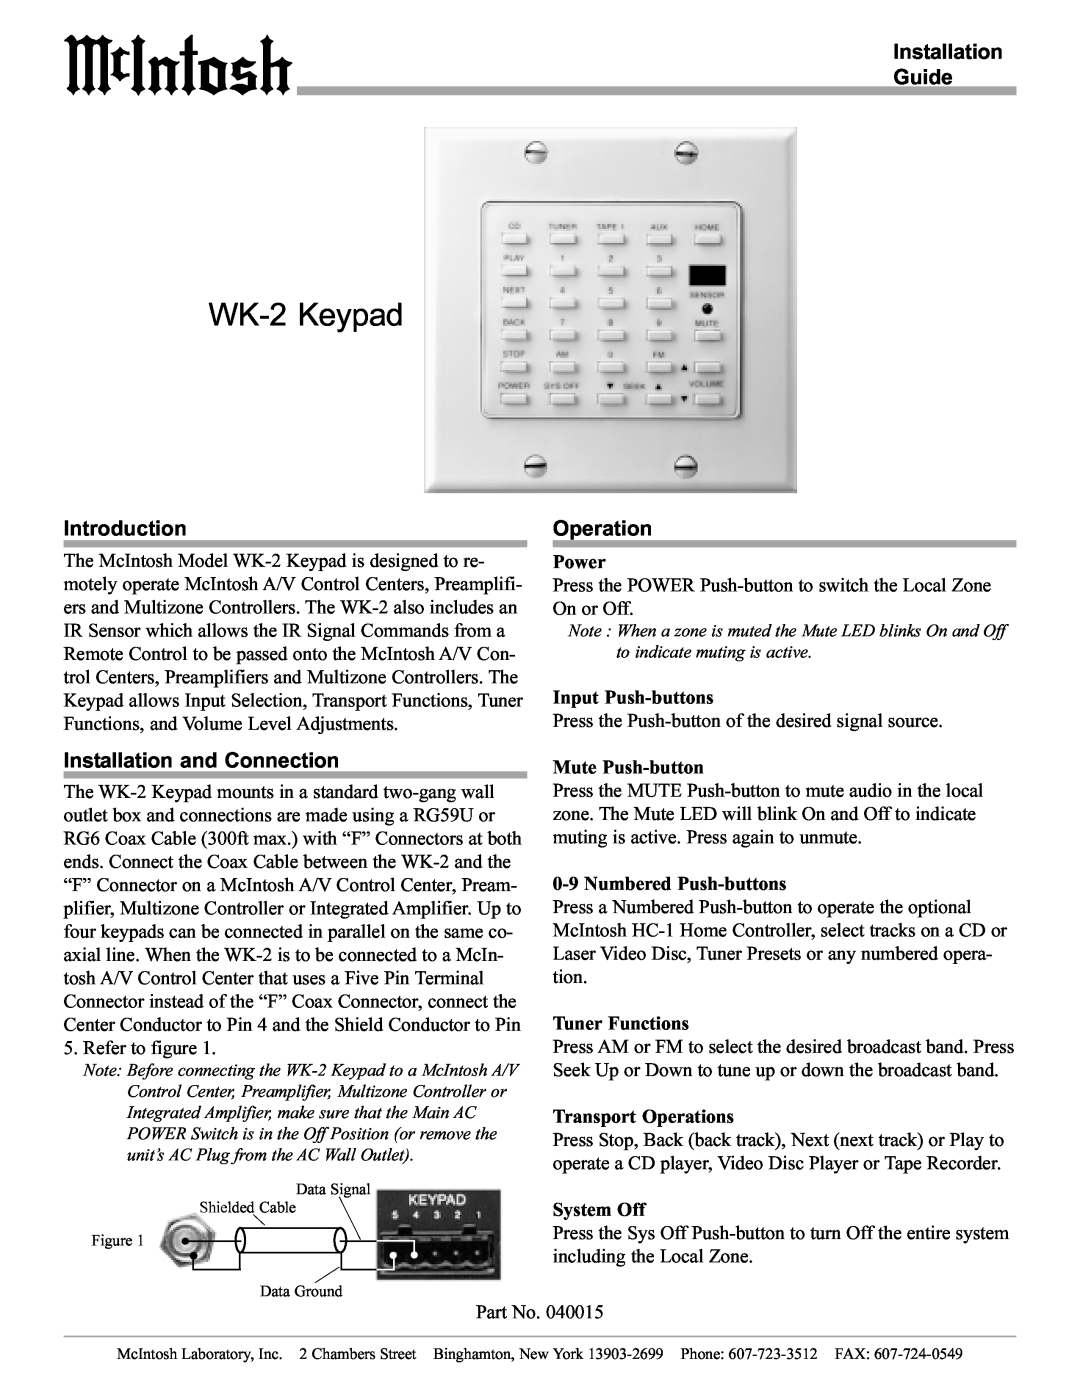 McIntosh manual WK-2Keypad, Installation Guide, Introduction, Installation and Connection, Operation, Power, System Off 